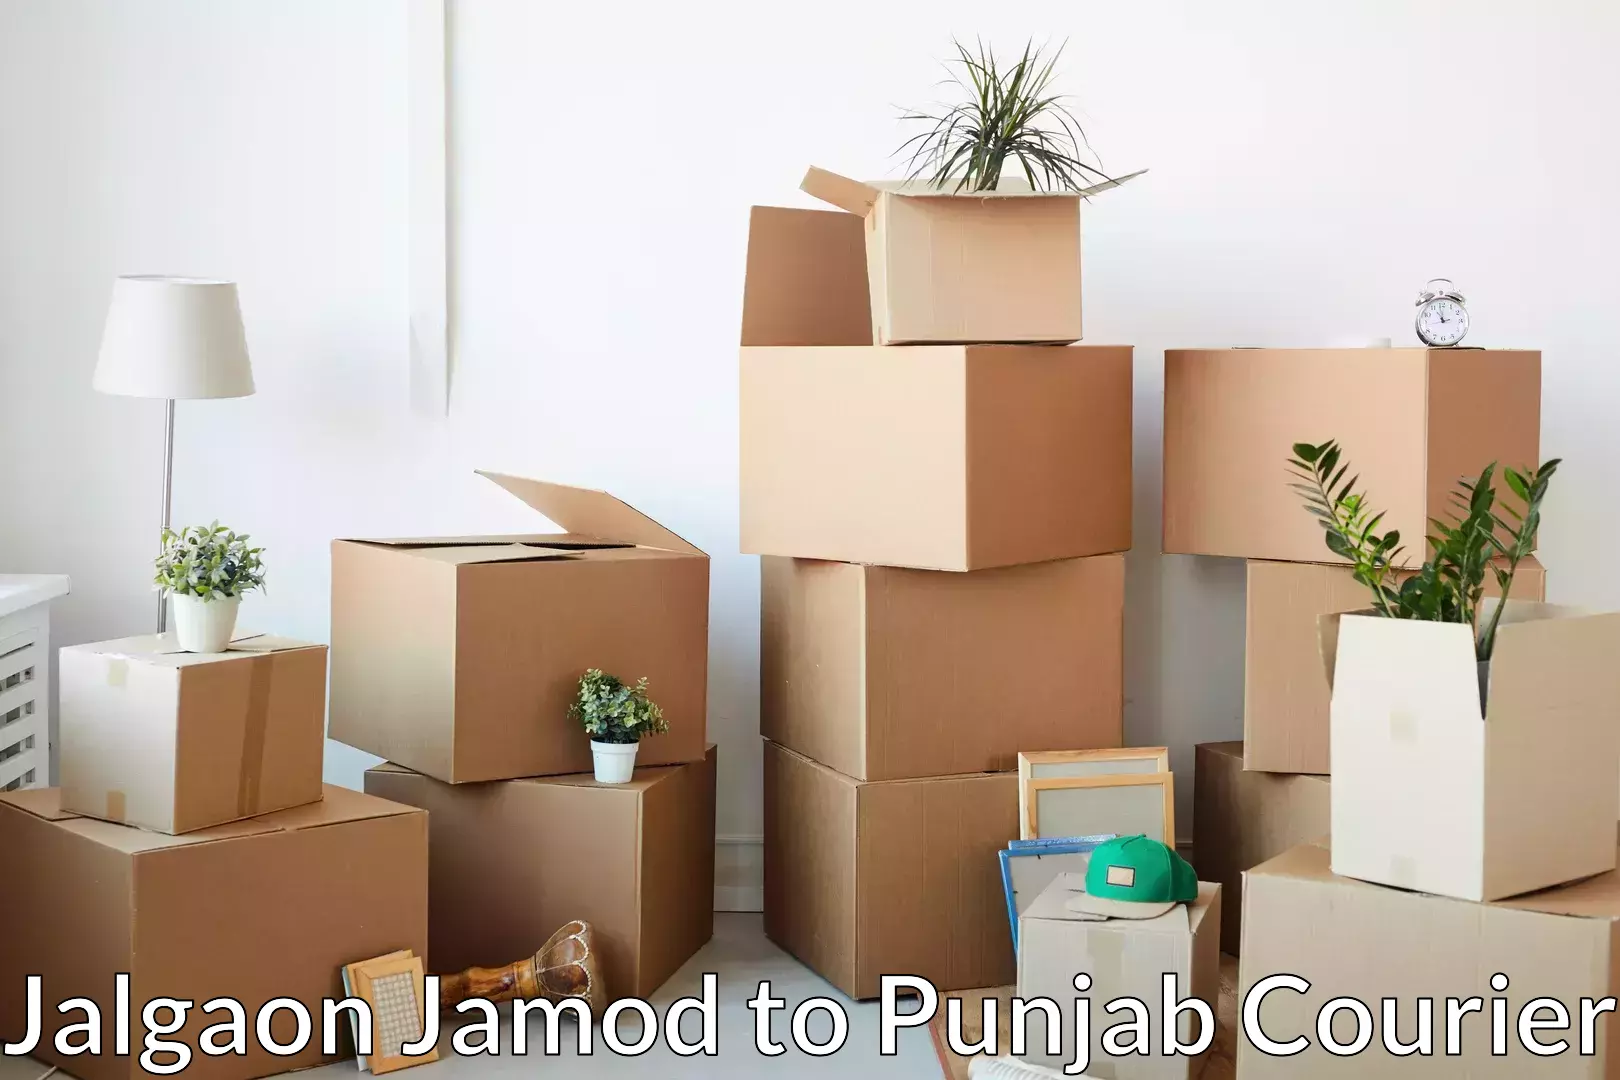 Nationwide furniture movers Jalgaon Jamod to Sultanpur Lodhi